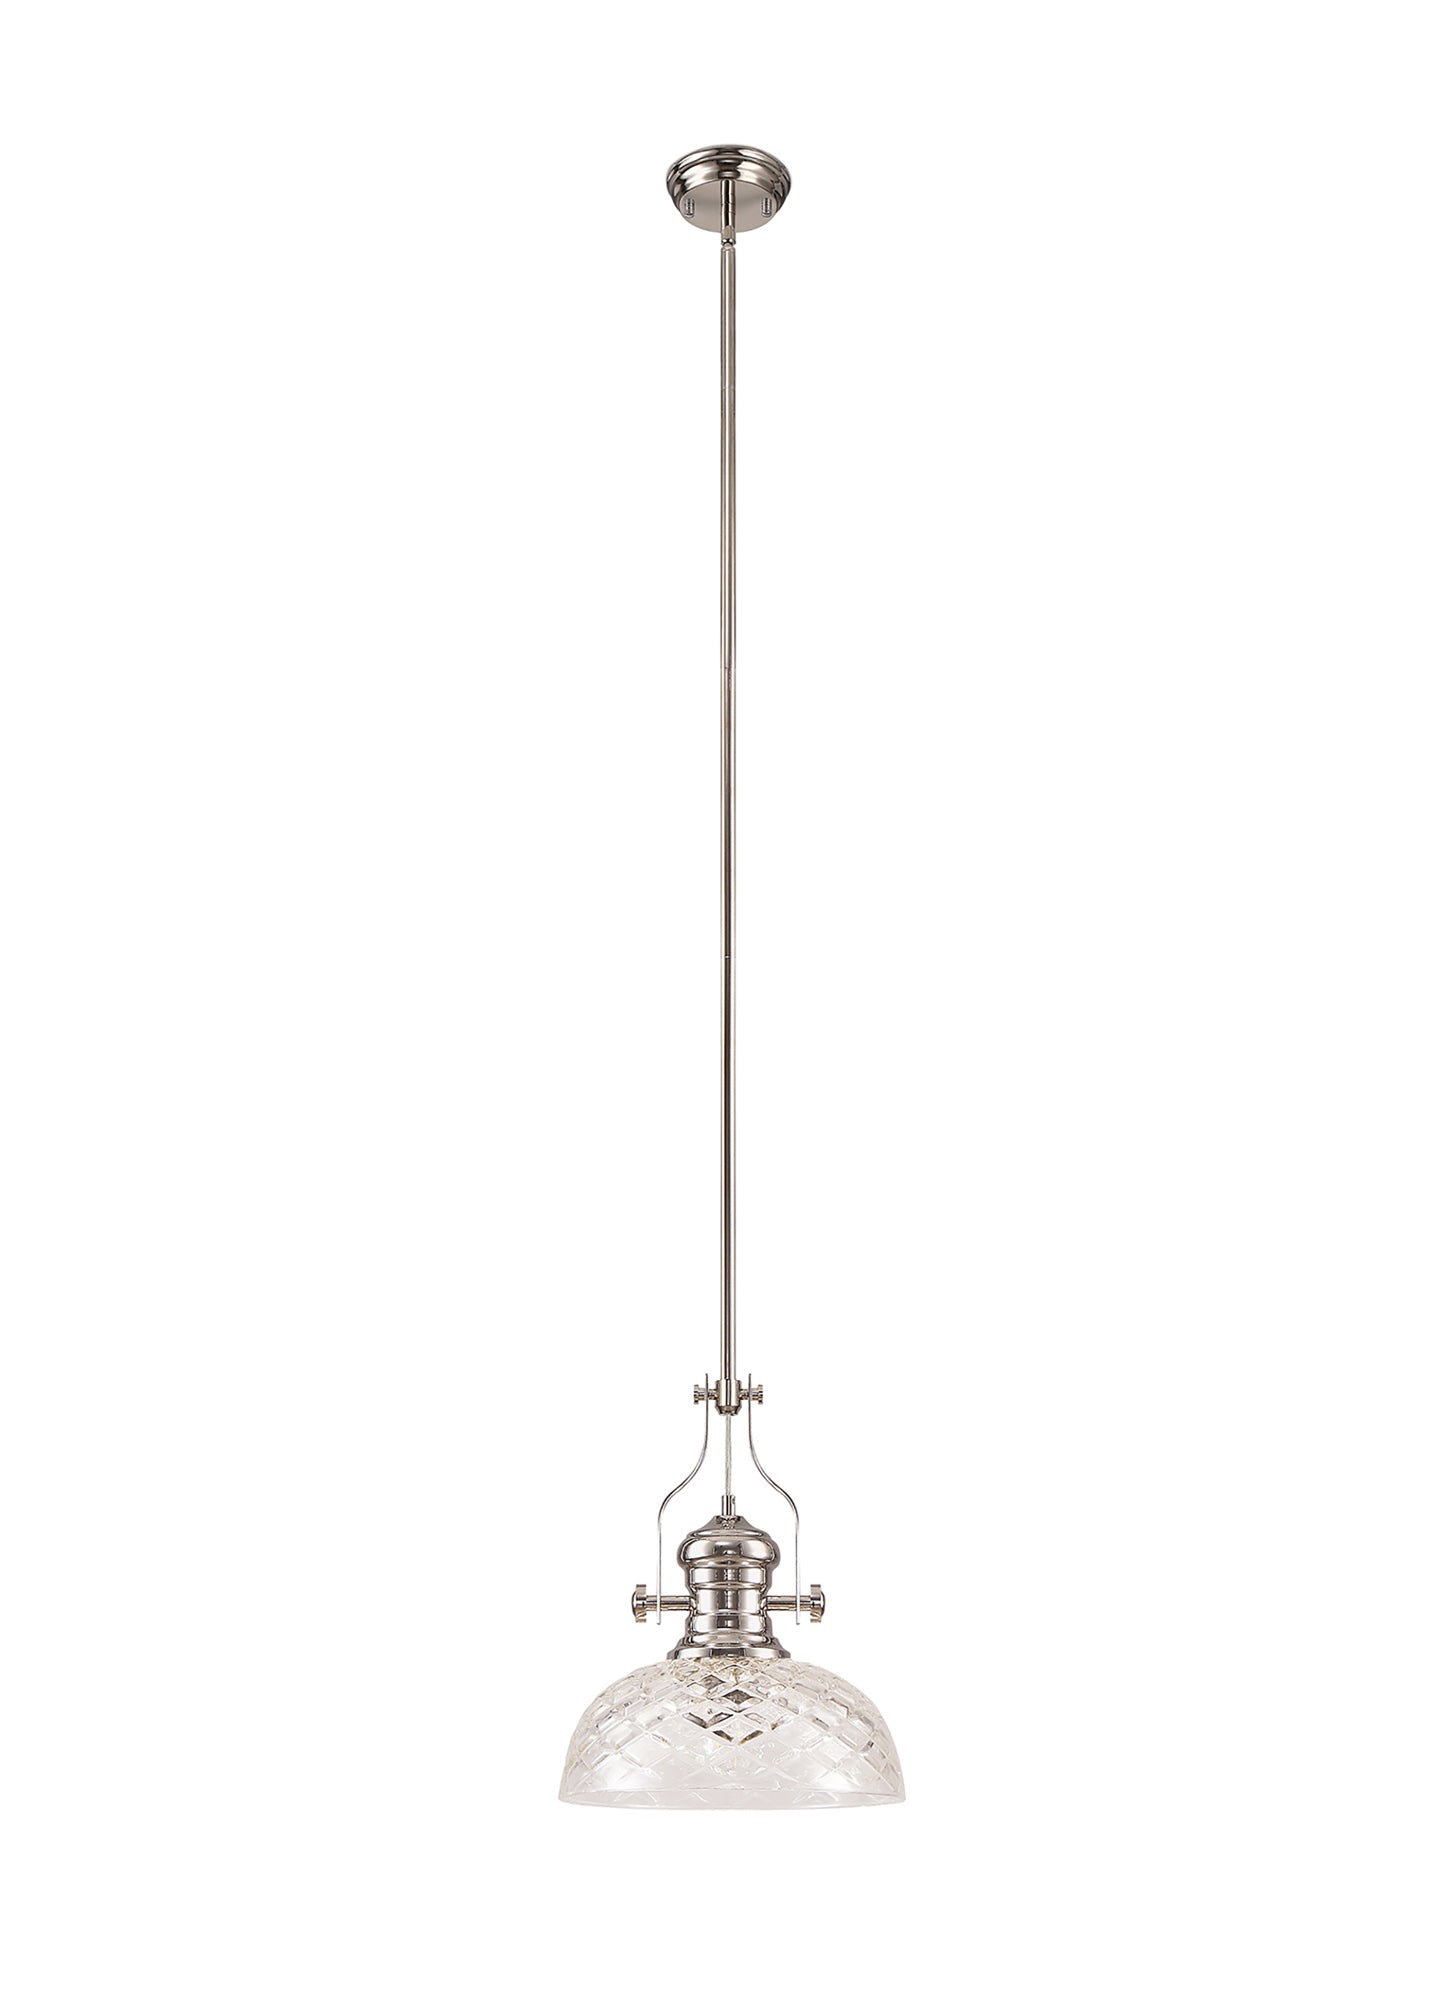 Docker Pendant With 30cm Flat Round Patterned Shade, 1 x E27, Polished Nickel/Clear Glass LOK104663